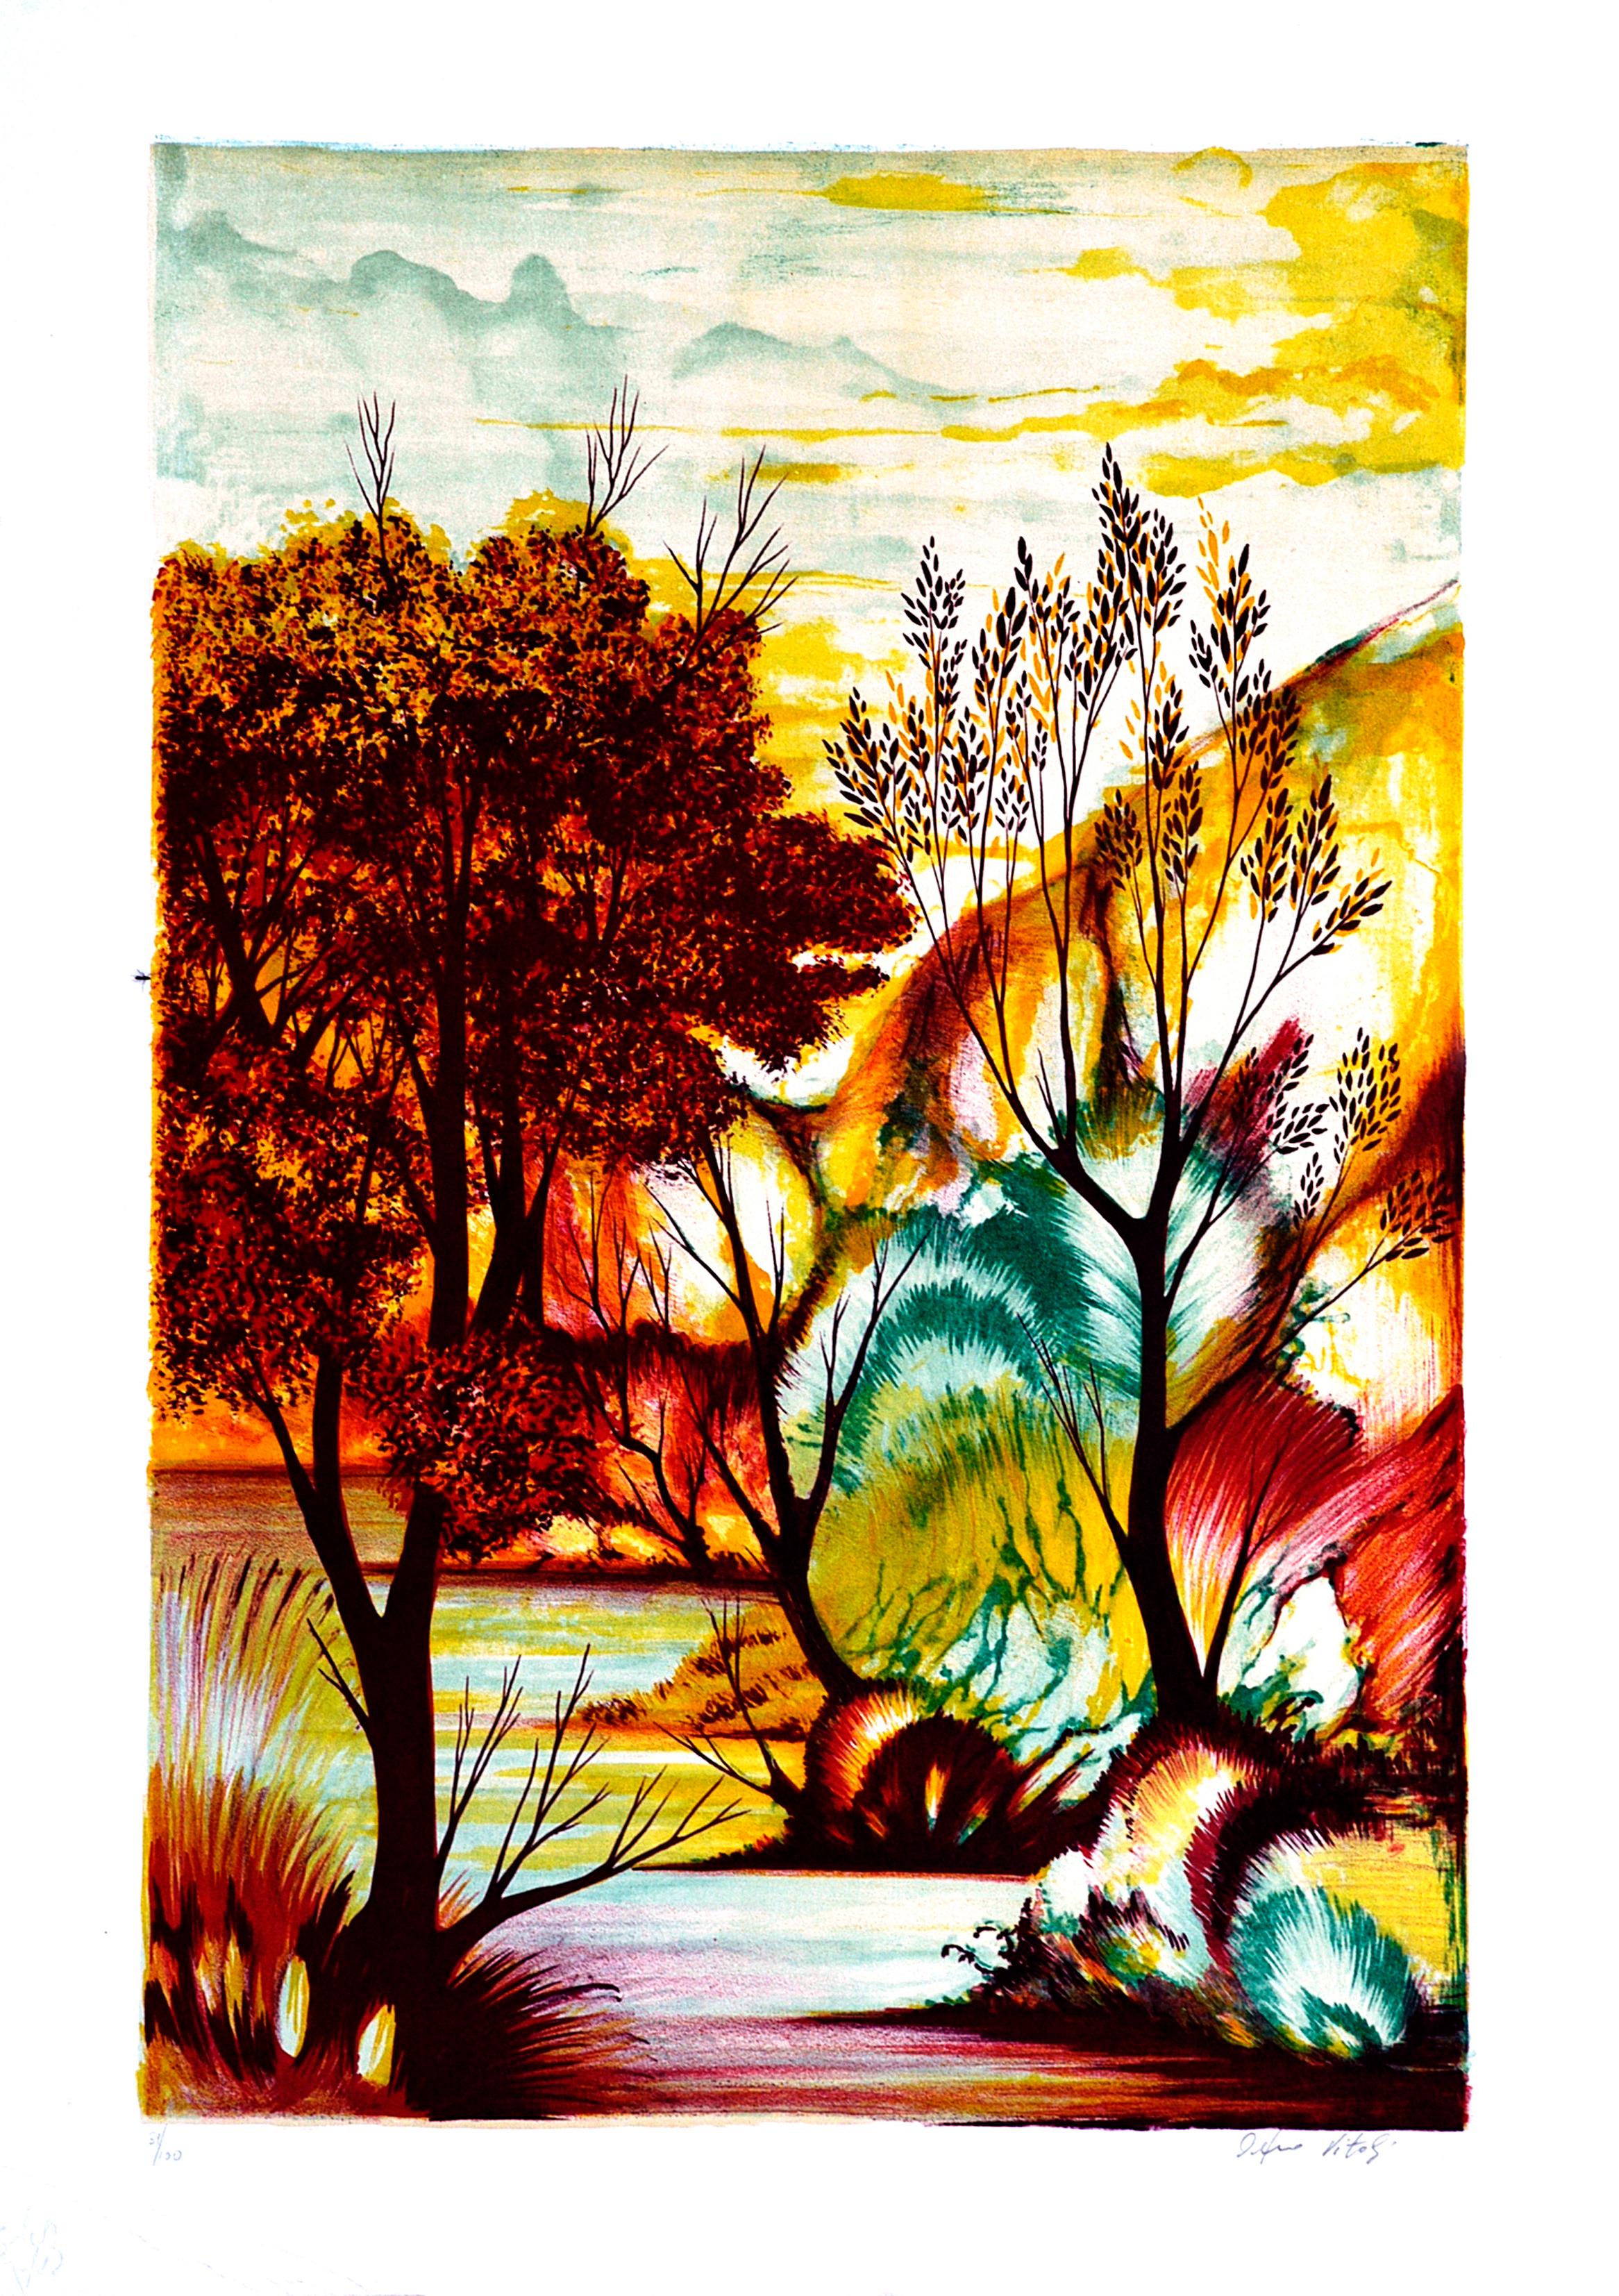 Automne - Lithographie d'Orfeo Vitali - 1970 environ